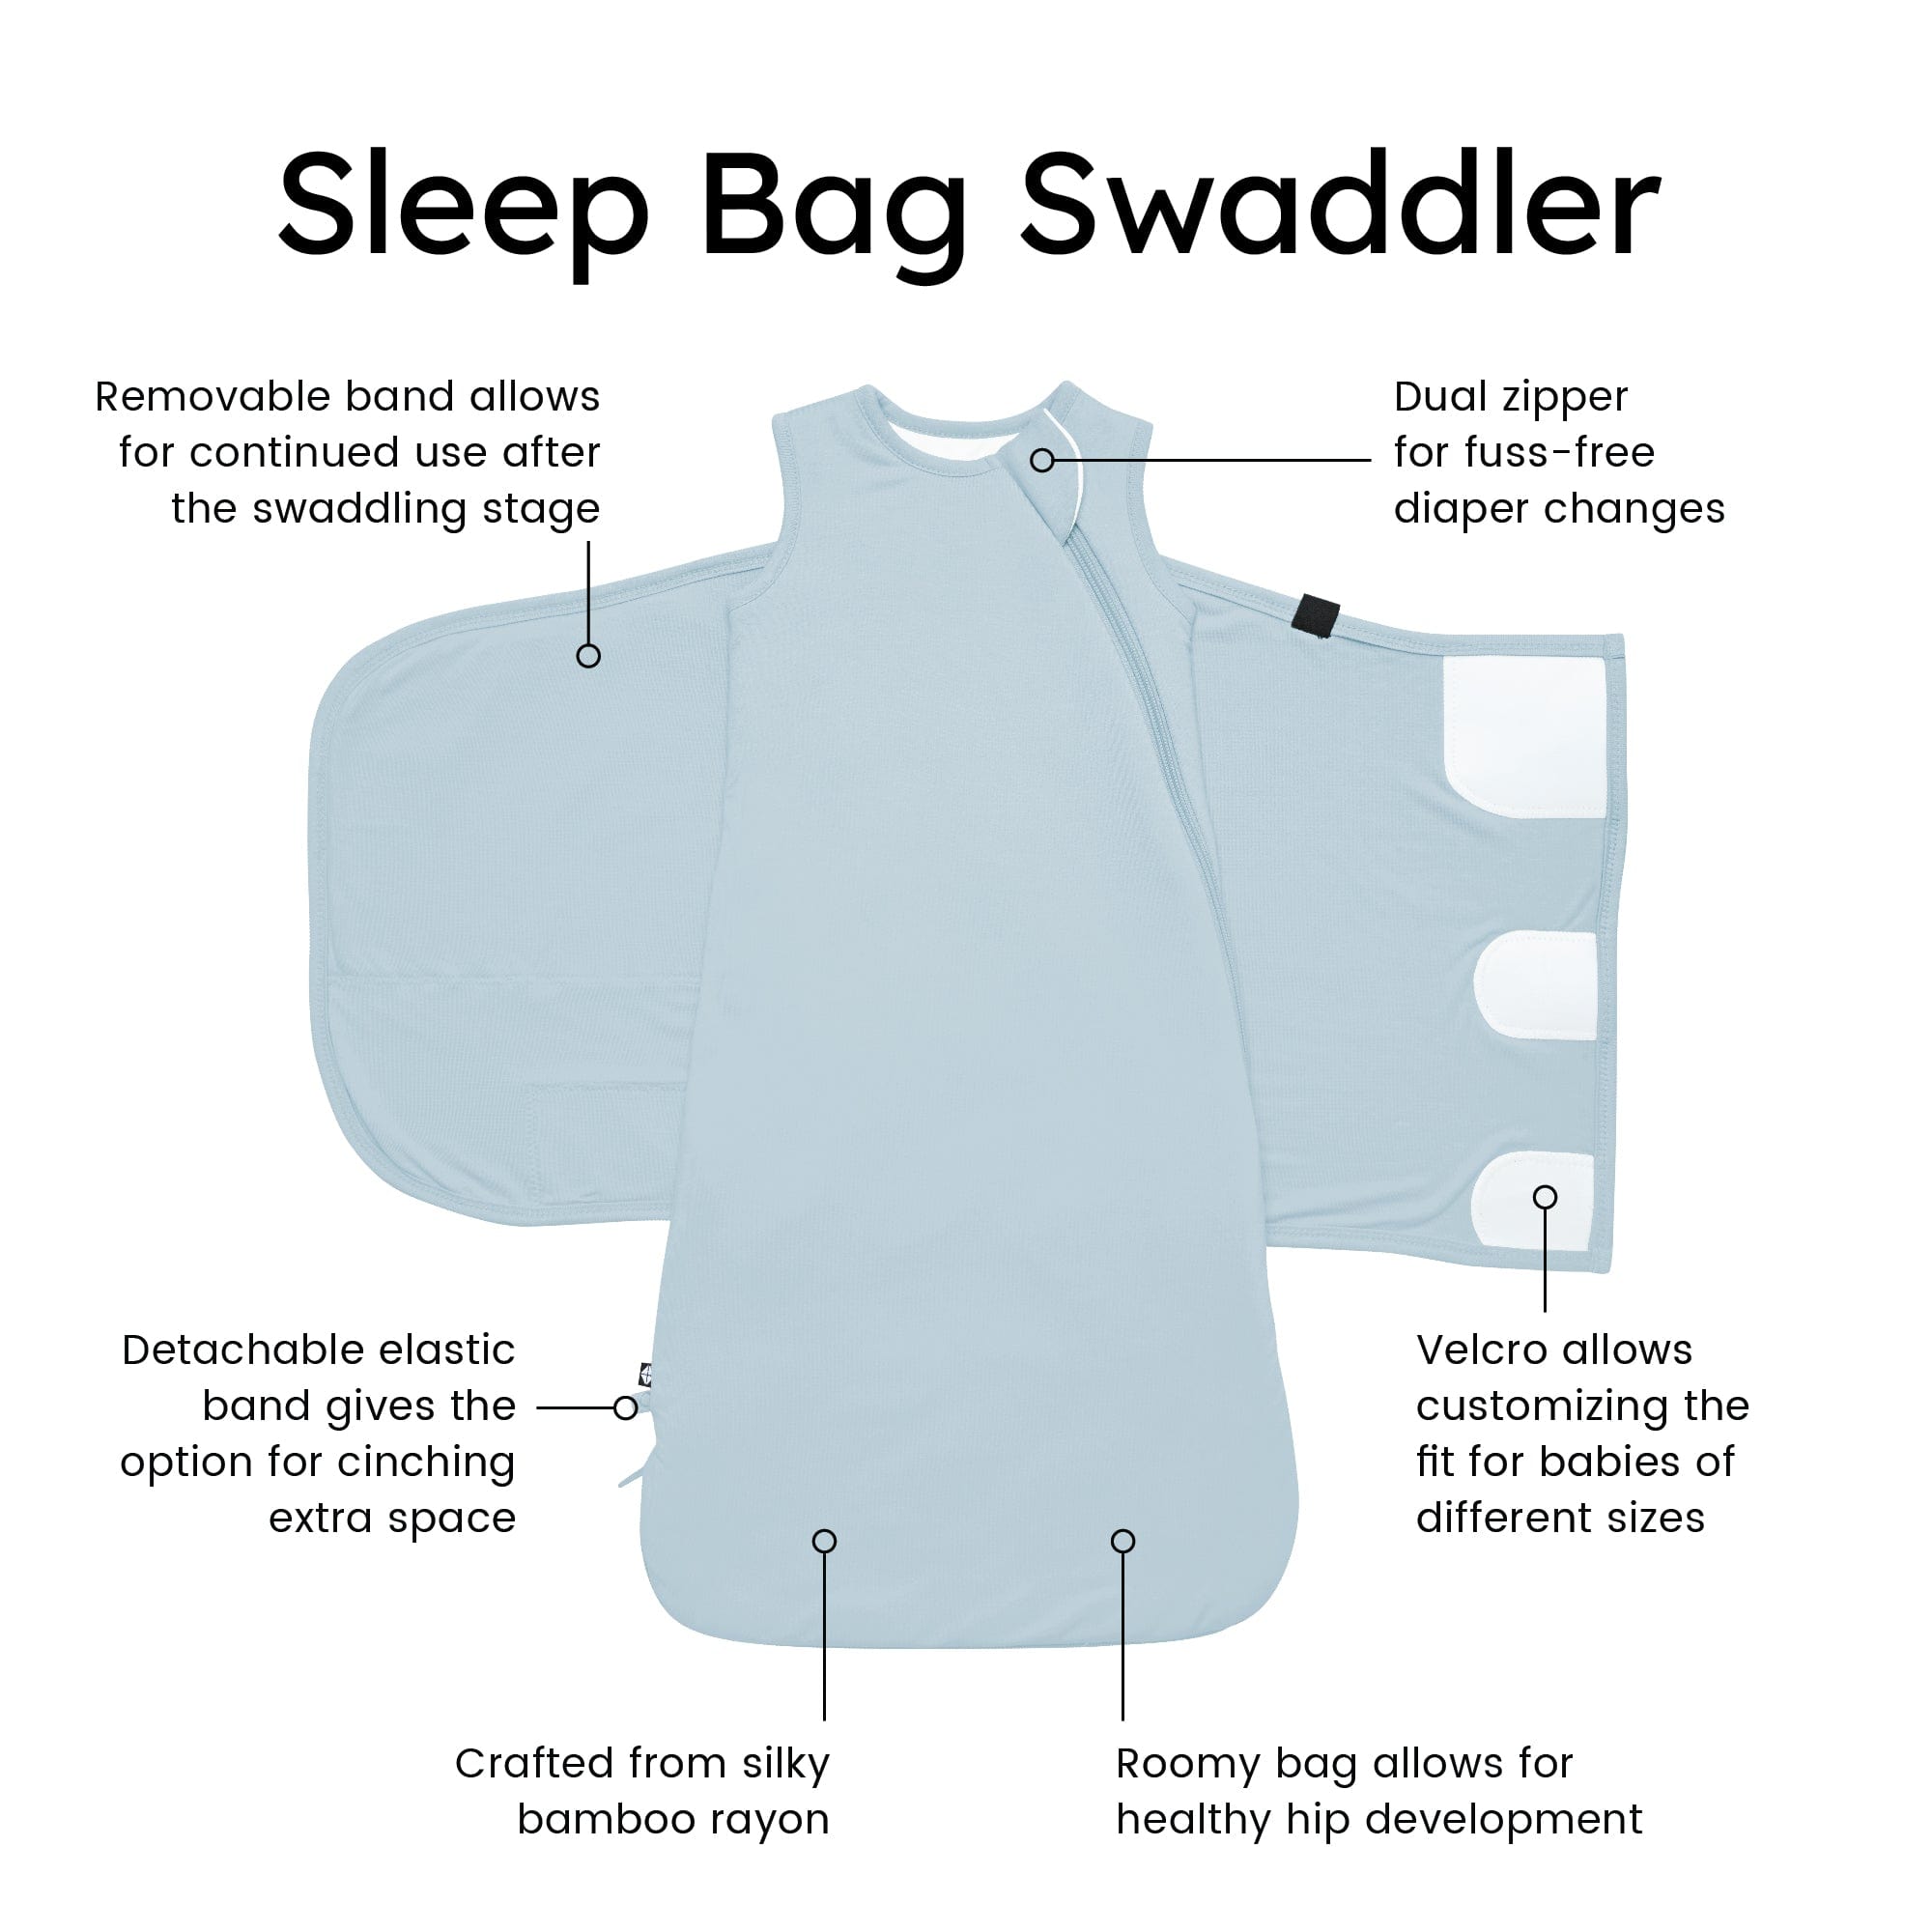 Kyte Baby Sleep Bag Swaddler in Fog with benefits listed